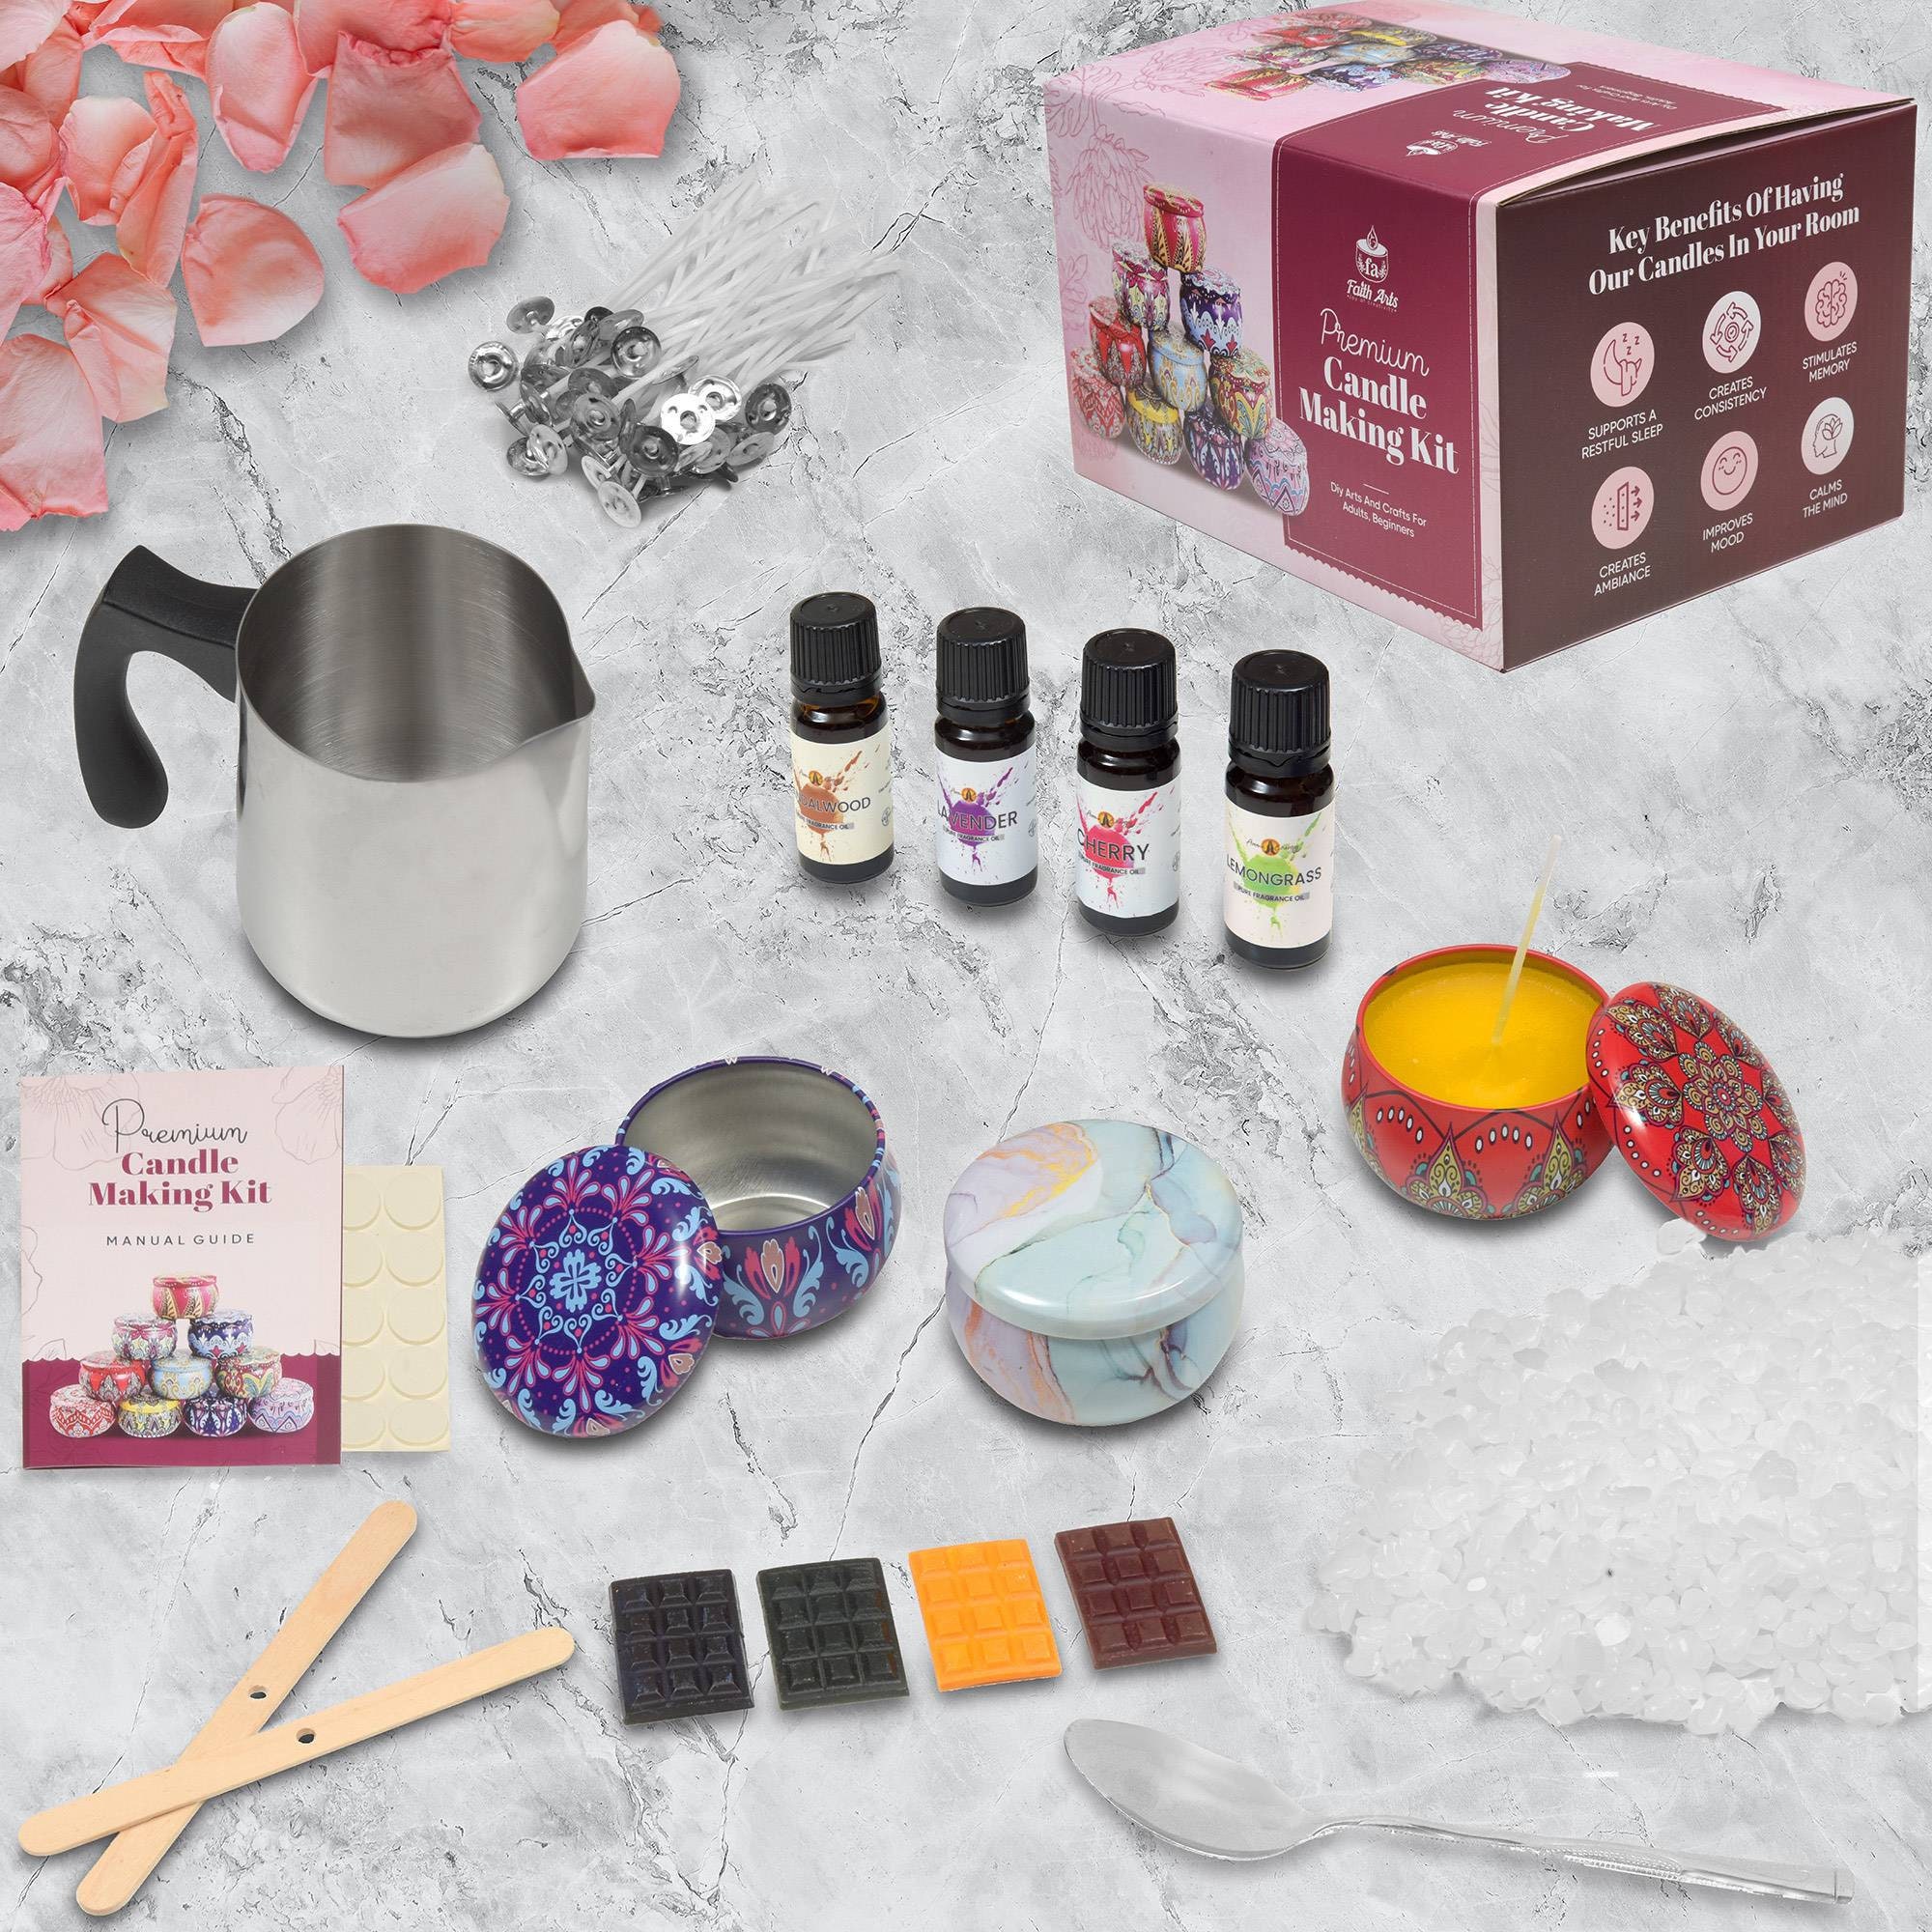 Candle Making Kit With Wax Melter, Candle Making Supplies, DIY Arts&crafts  Kits Gift for Beginners,adults,kids,including Electric Stove 